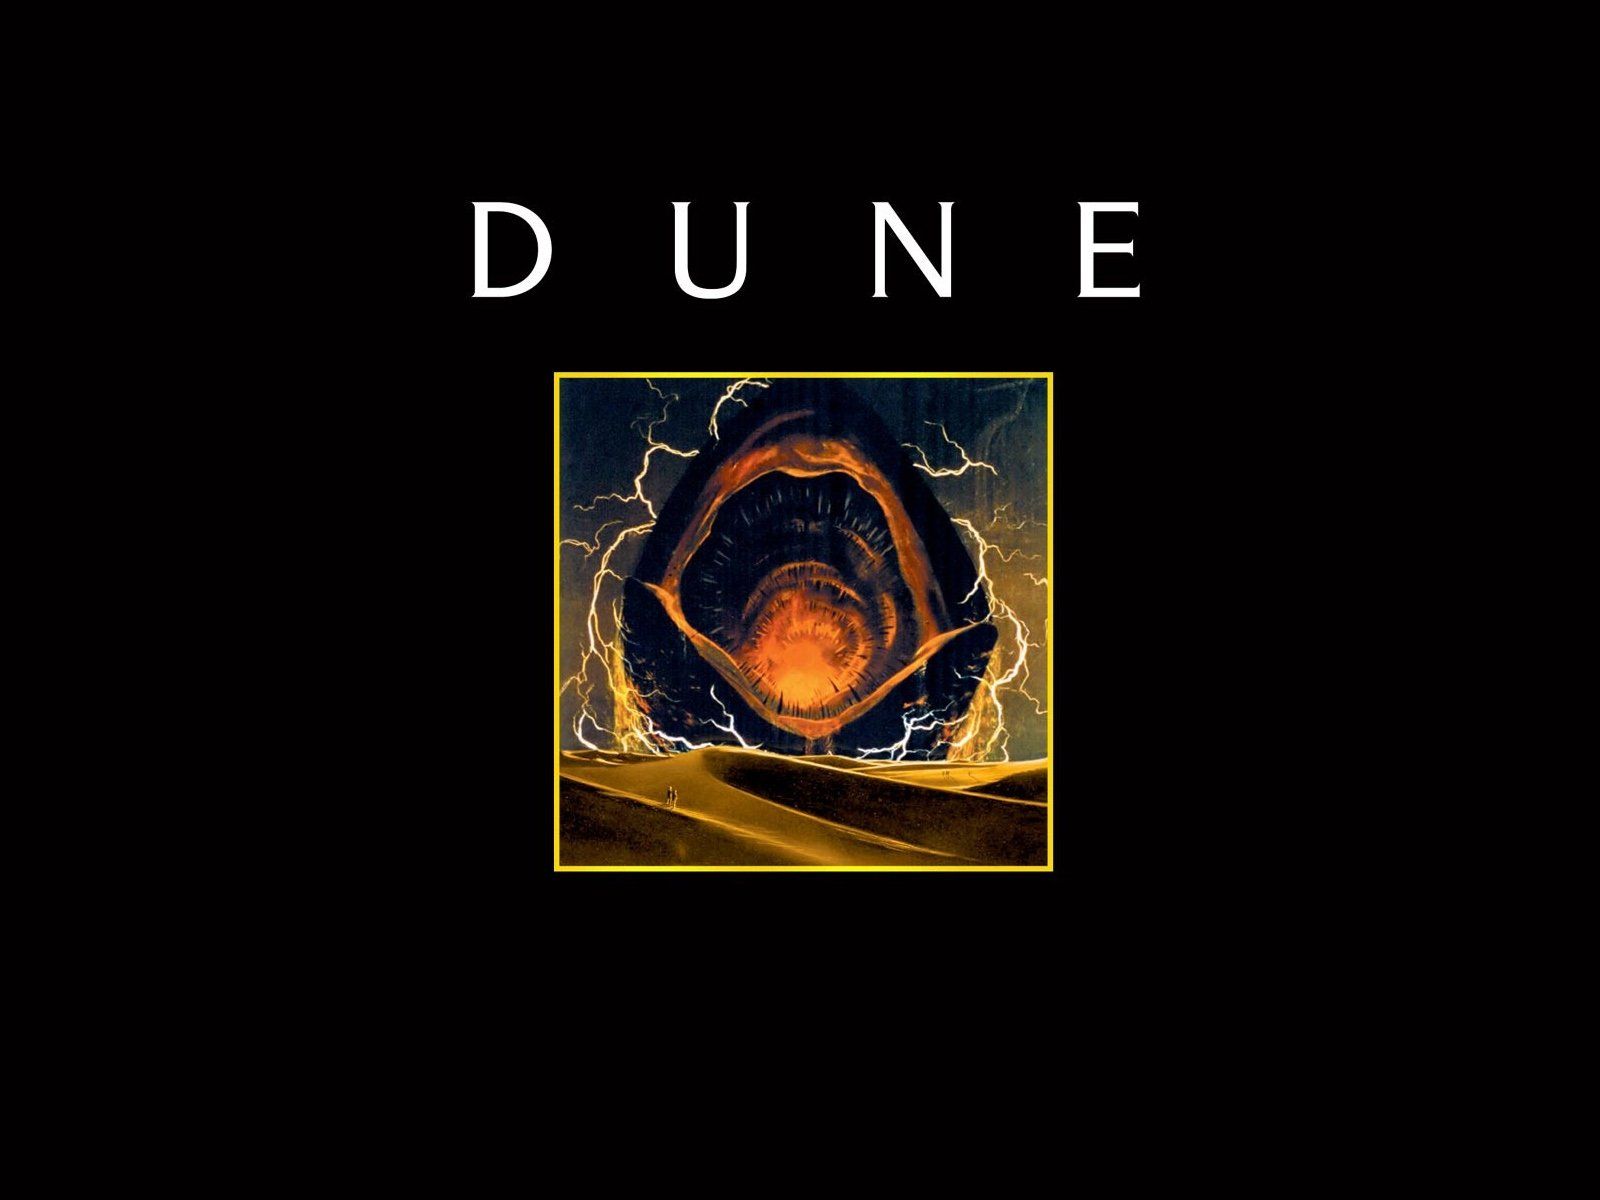 Dune (Sci Fi) HD Wallpaper and Background Image